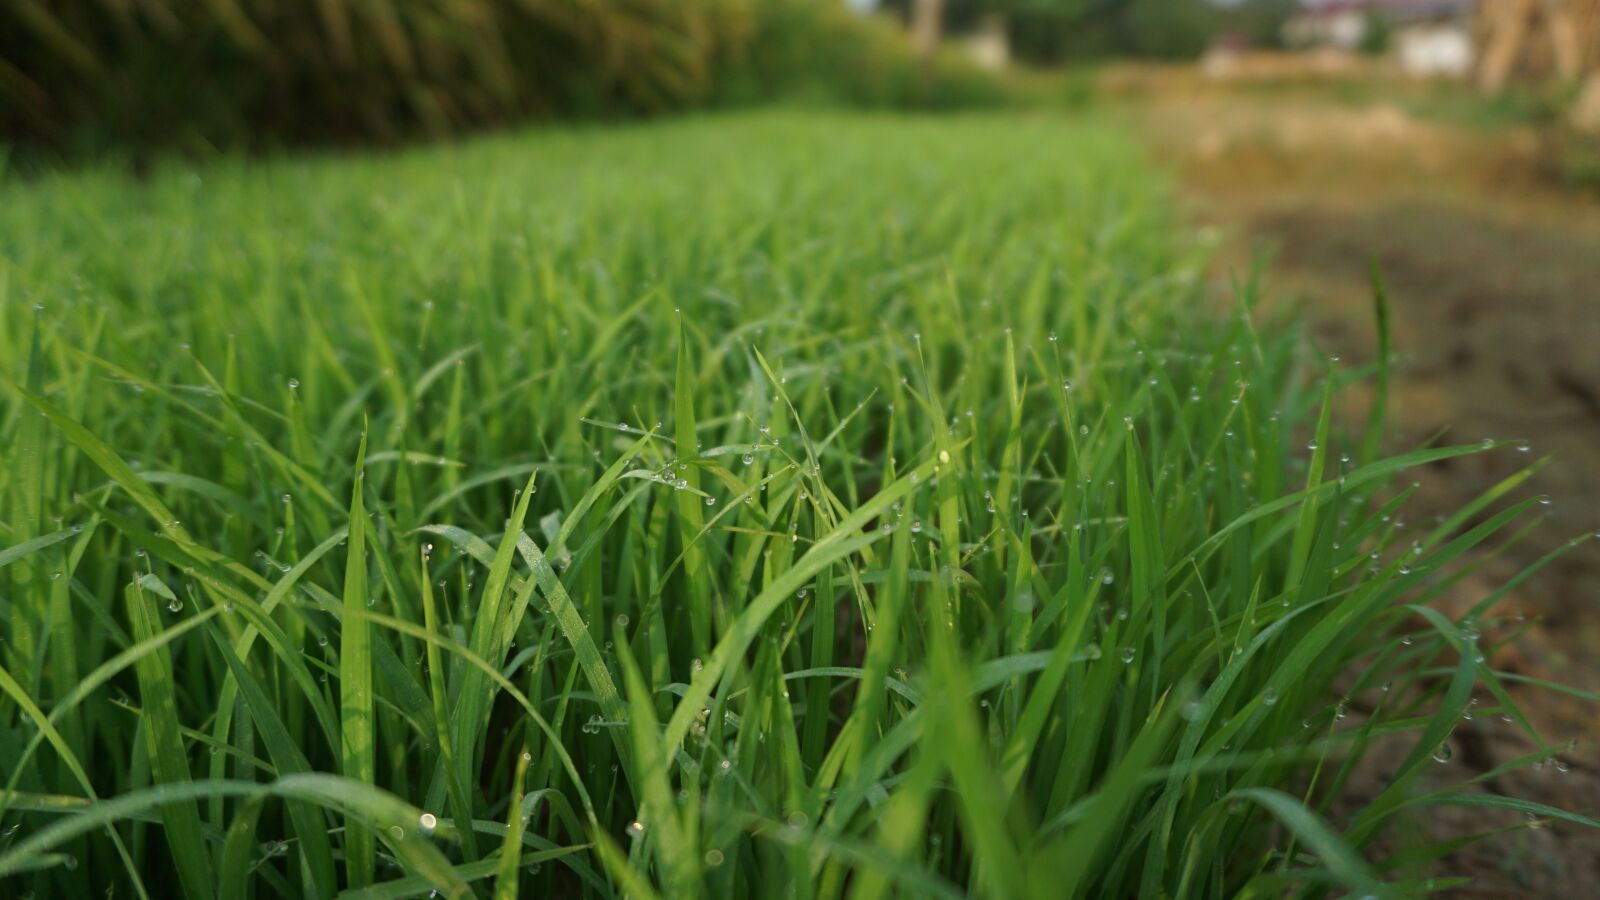 Sony a5100 sample photo. Lawn, field, kinds of photography